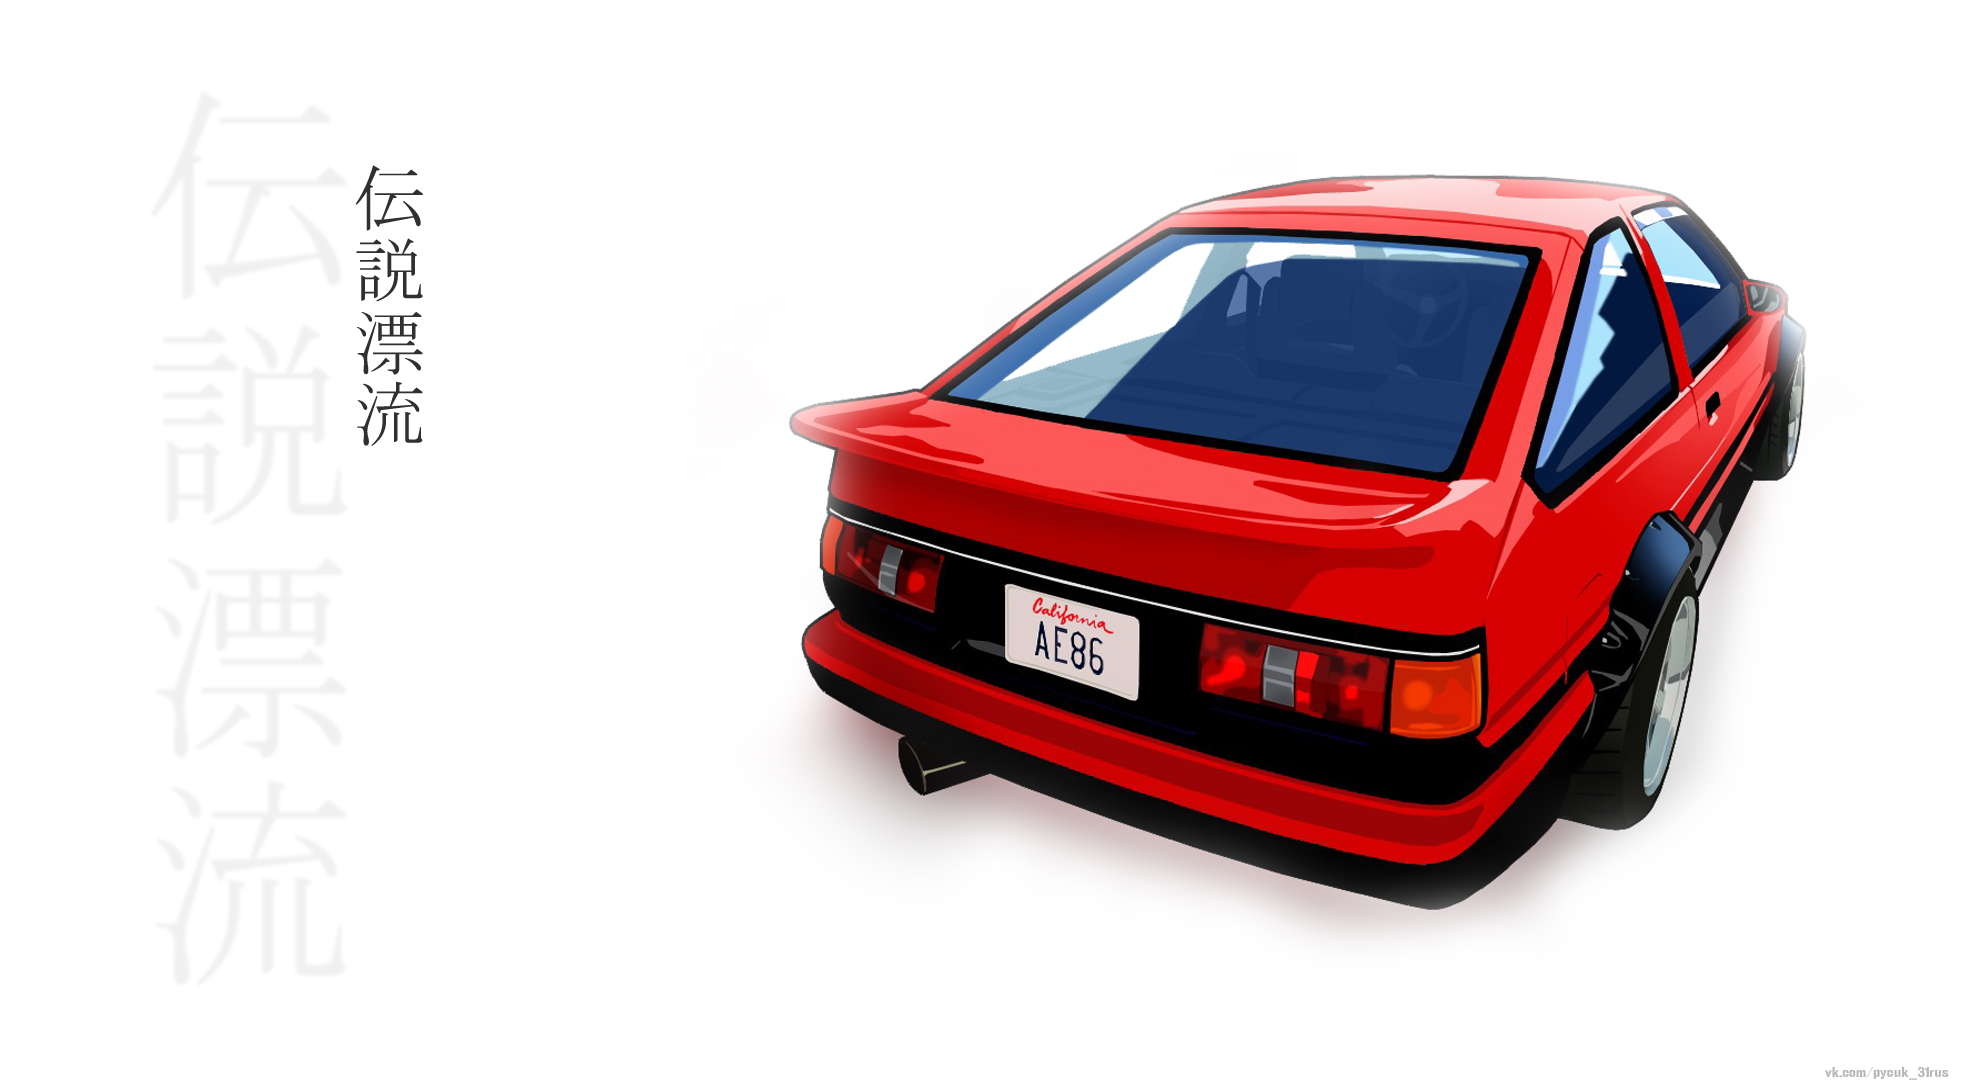 Toyota ae86 drift legend red car wallpaper photos pictures